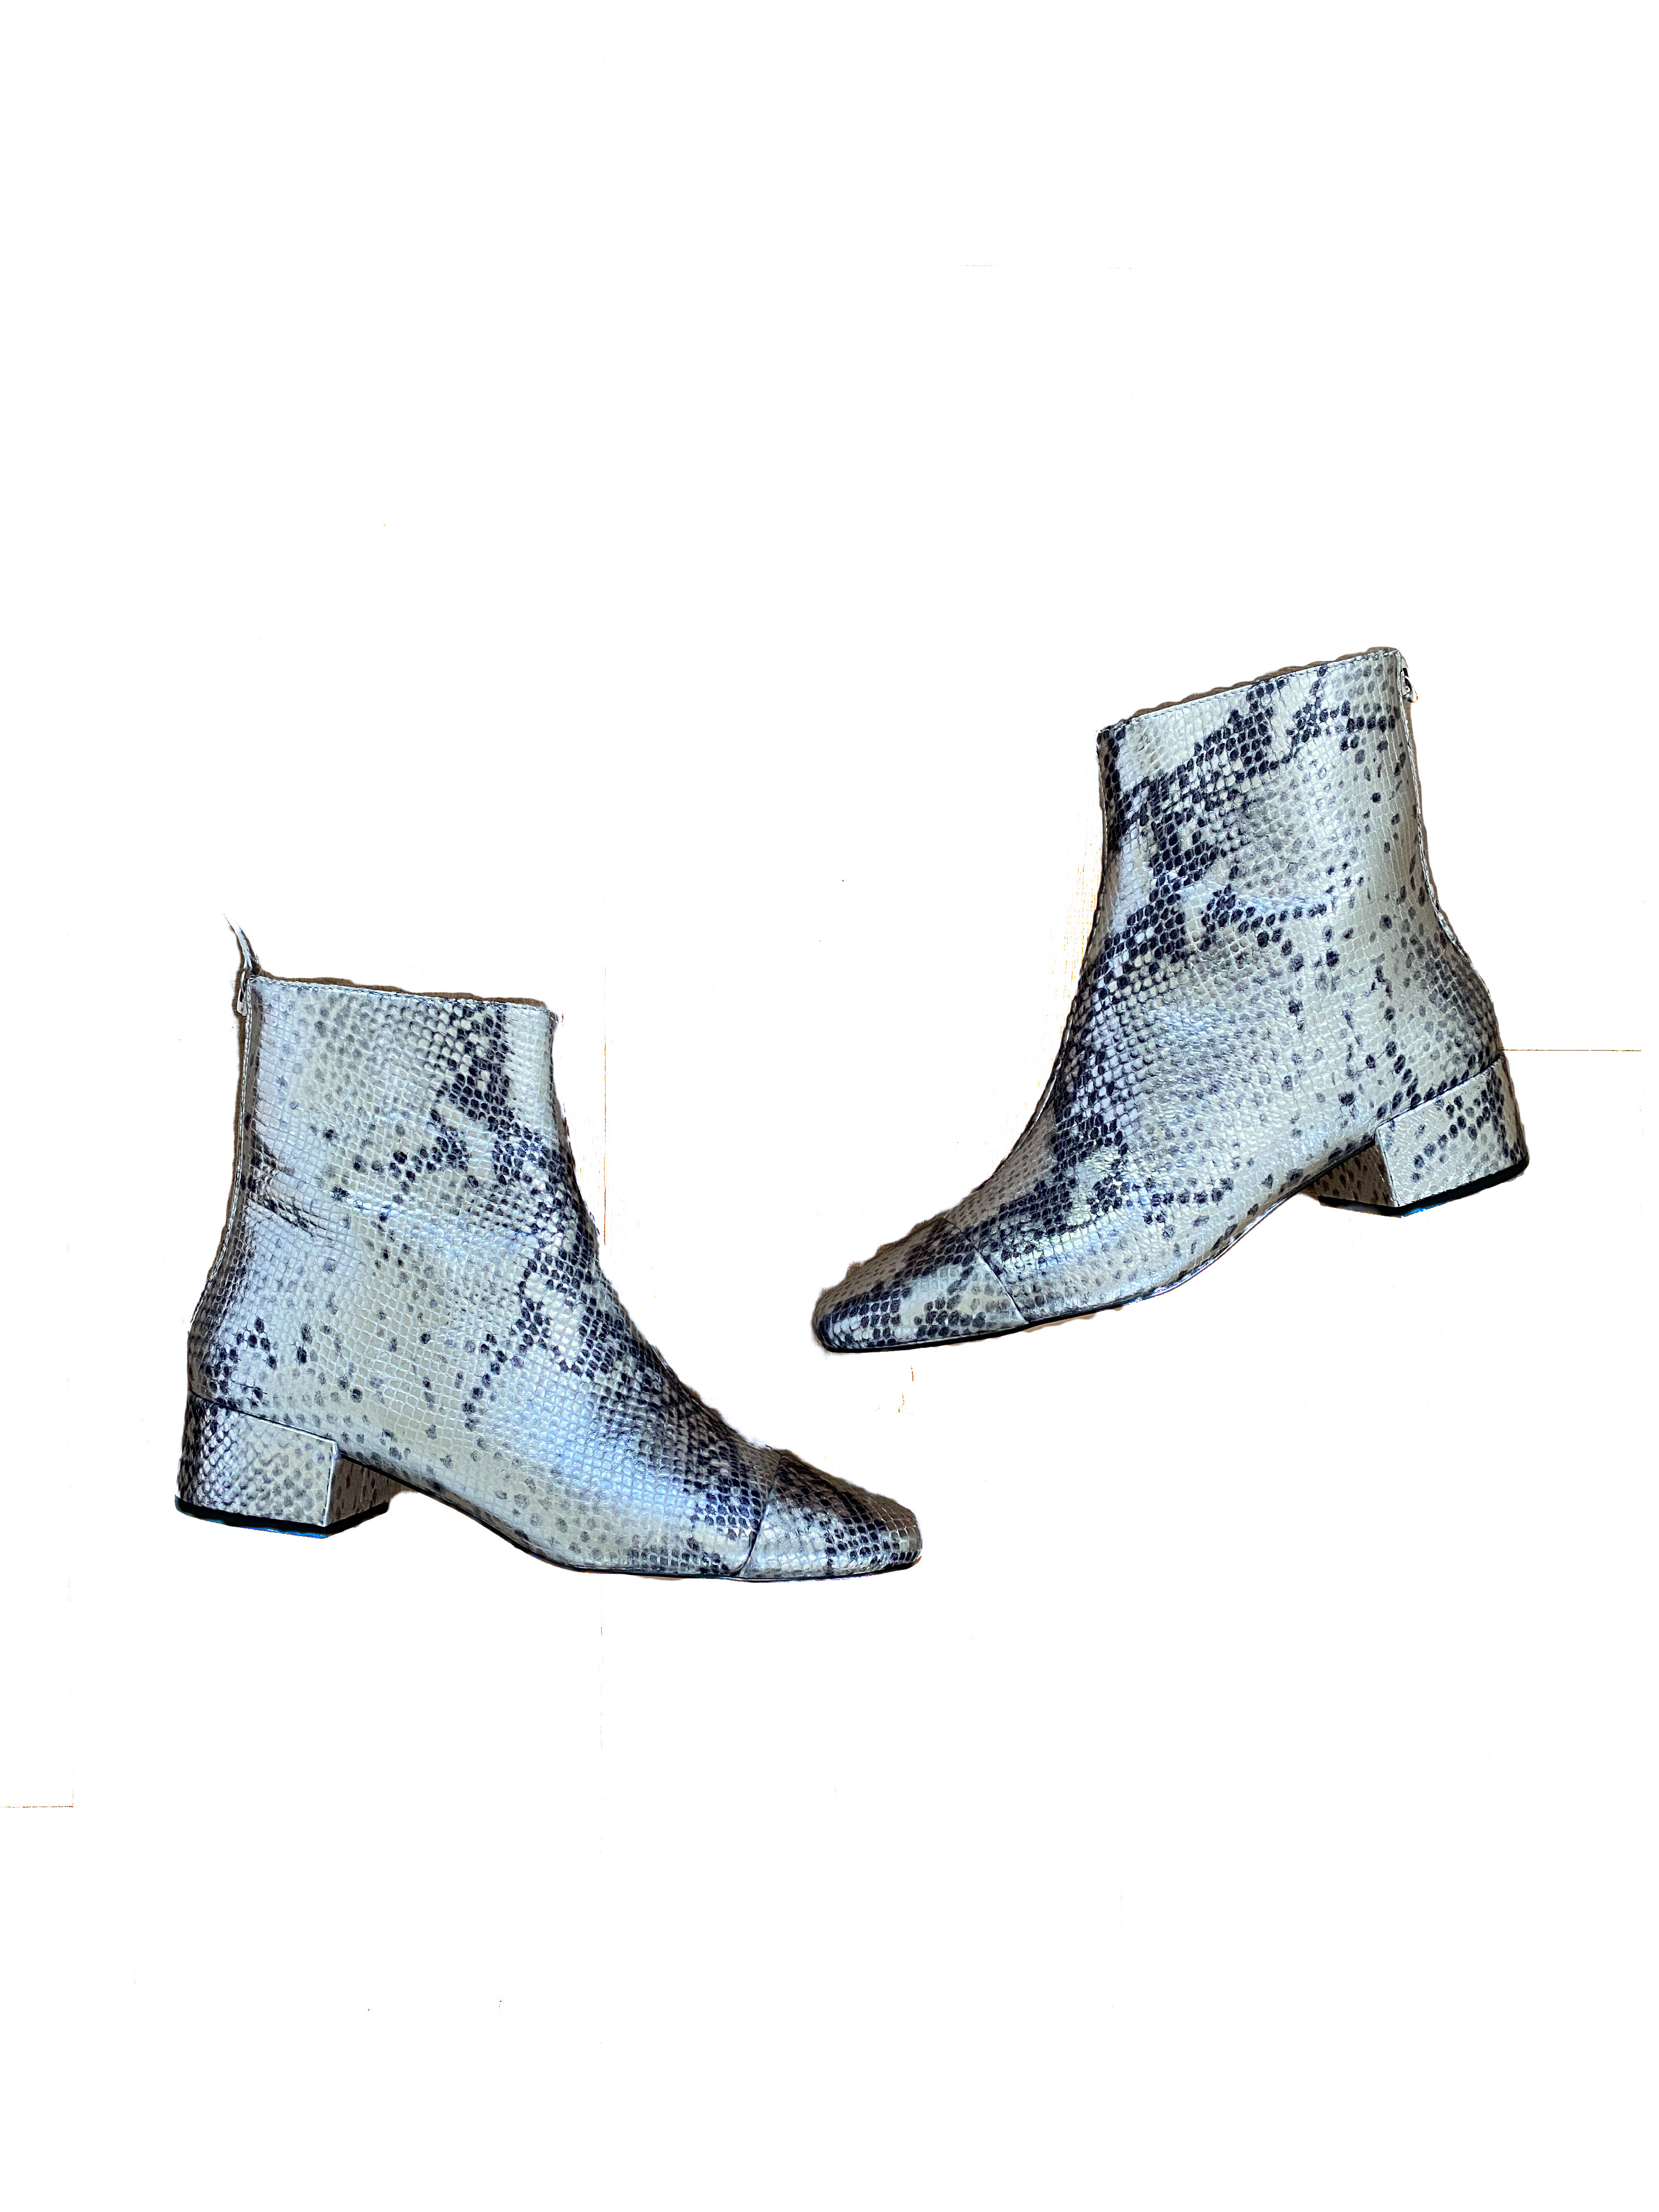 A pair of silver snakeskin boots with a 1 inch heel and a zipper up the back that I've included in my fall shoe capsule are silhouetted against a white background with text alongside them.